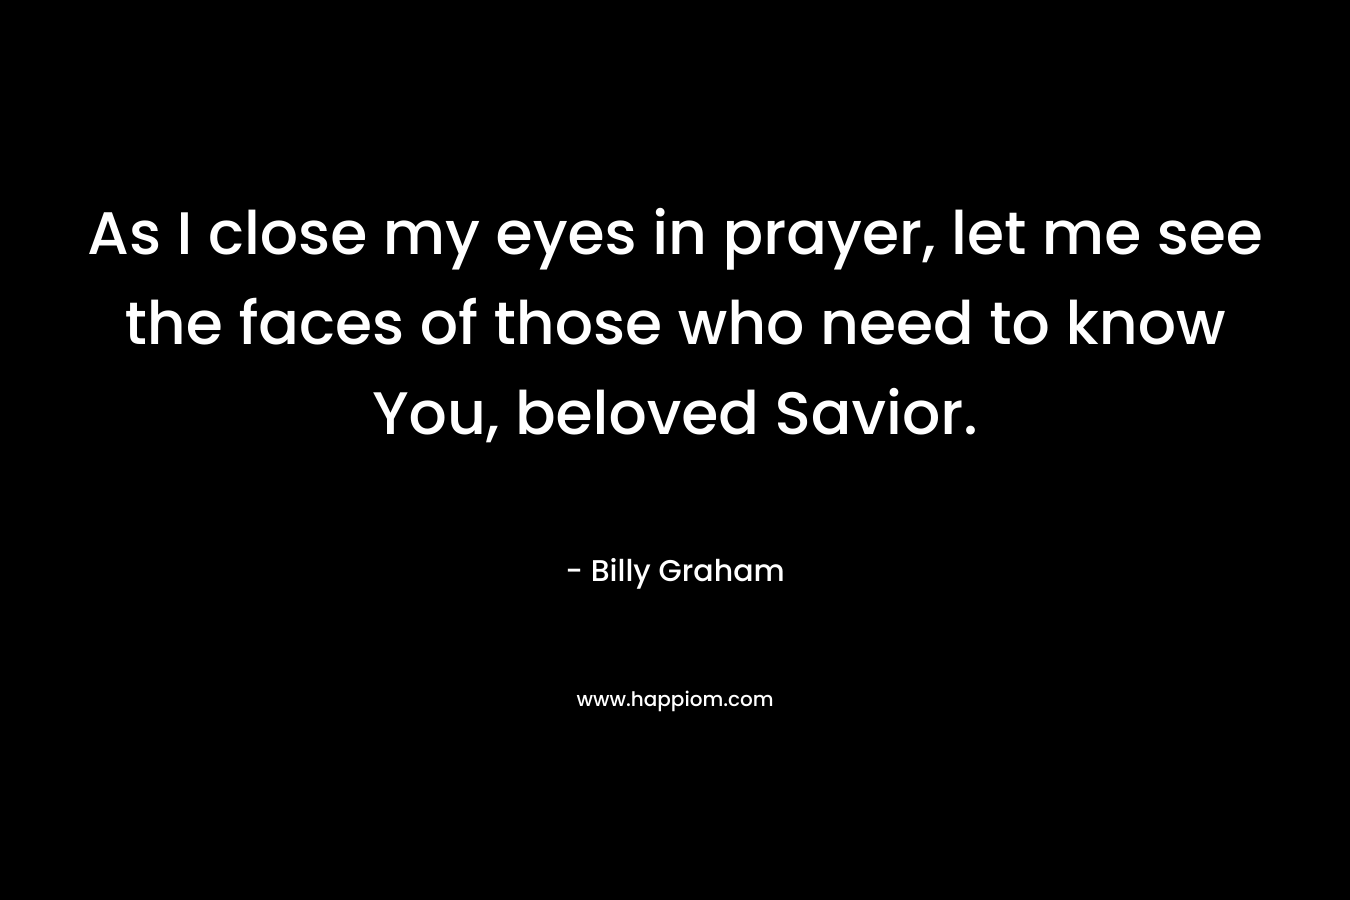 As I close my eyes in prayer, let me see the faces of those who need to know You, beloved Savior.